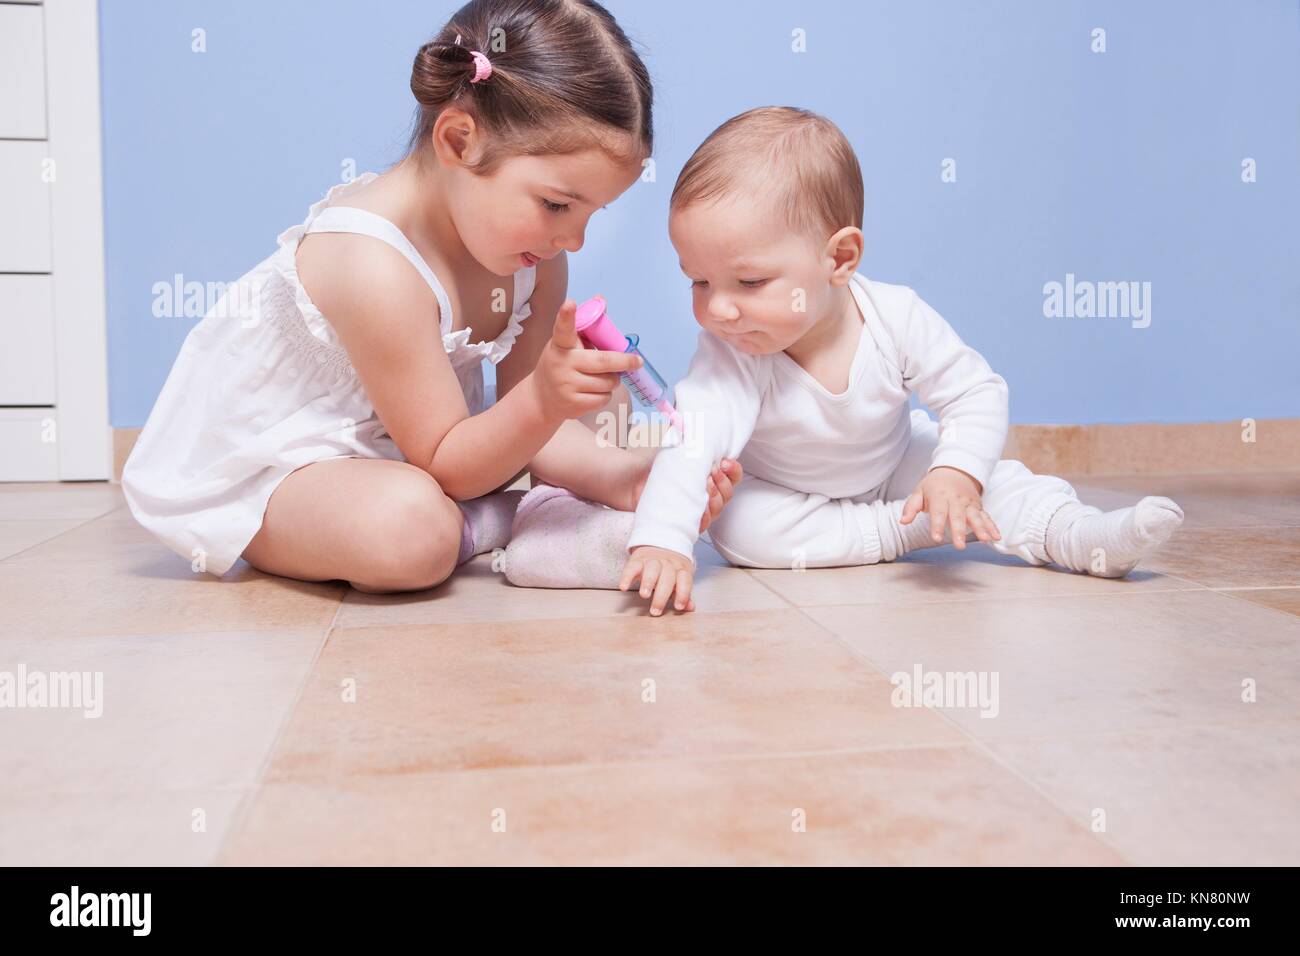 Baby brother and toddler sister playing doctor with syringe. Stock Photo